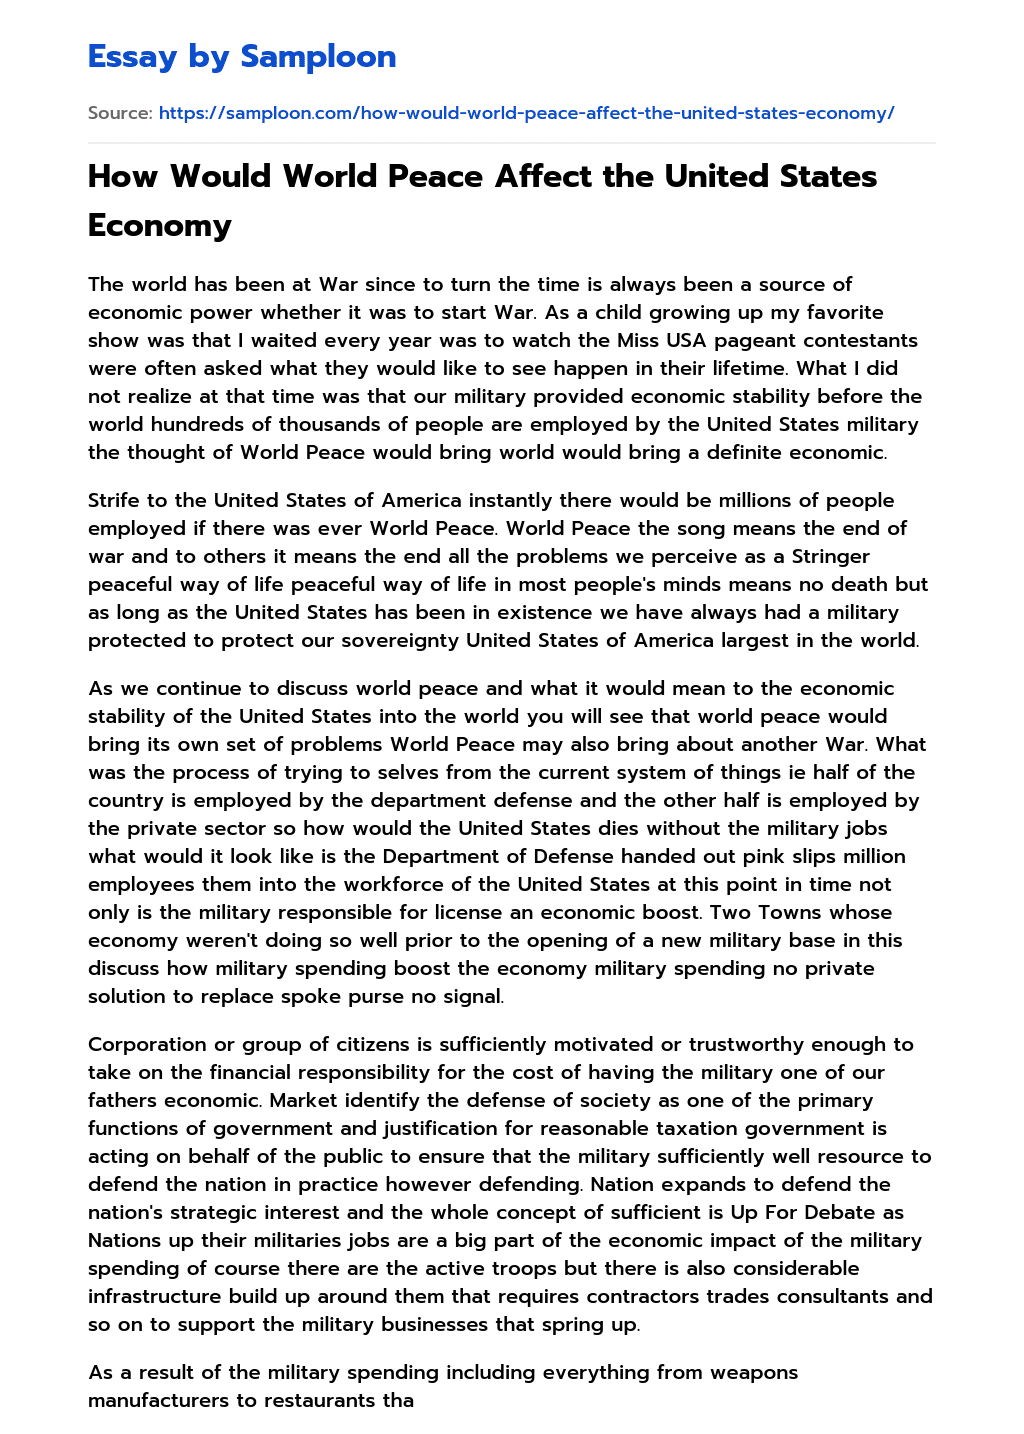 How Would World Peace Affect the United States Economy essay